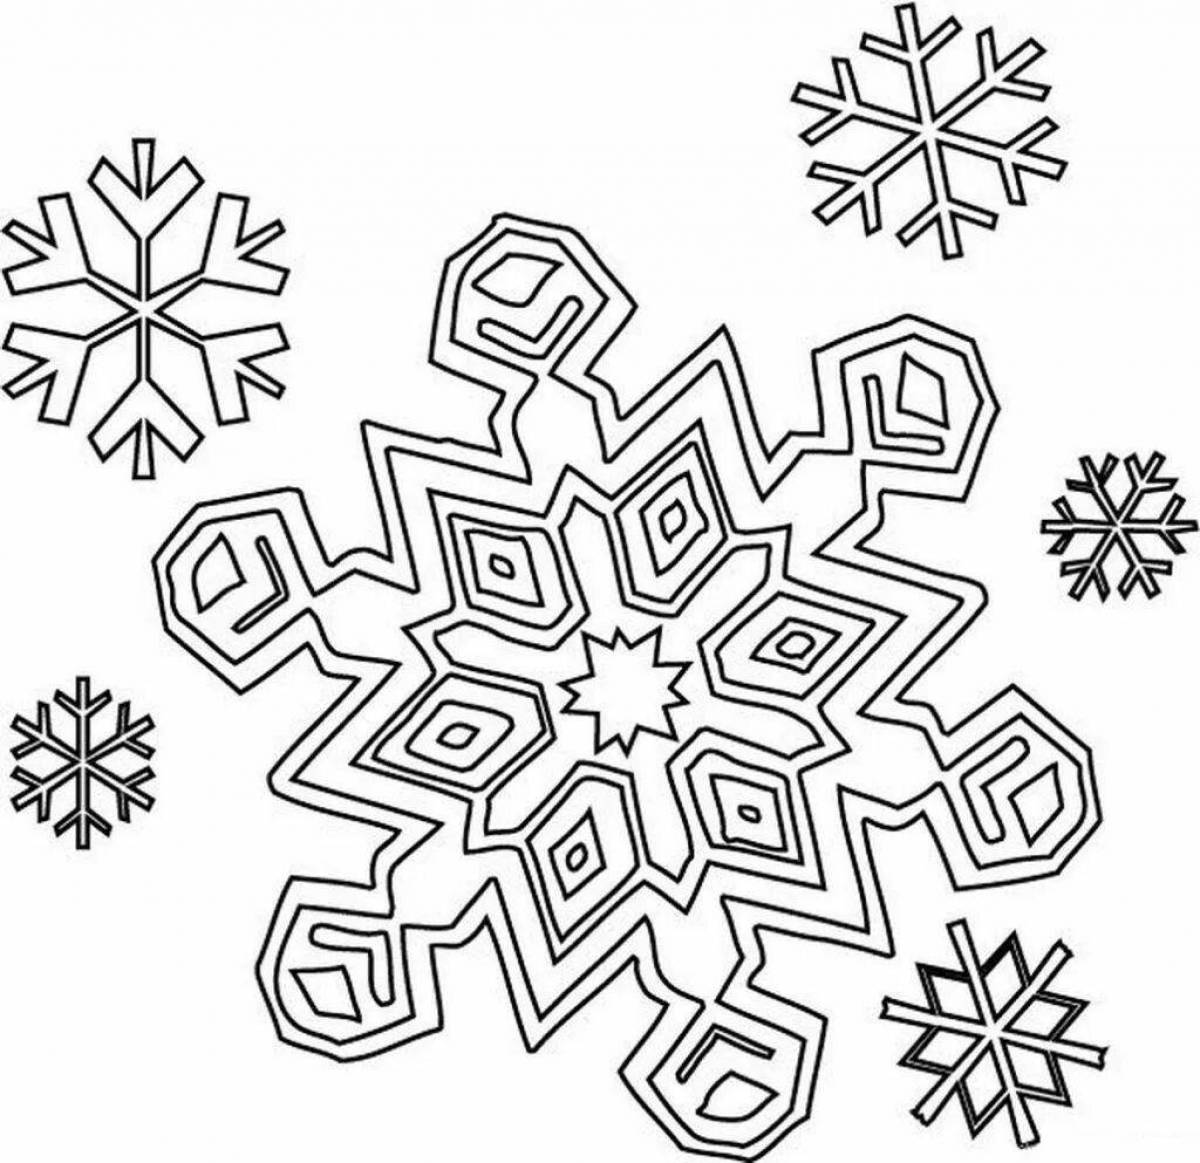 Exquisite snowflake christmas coloring book